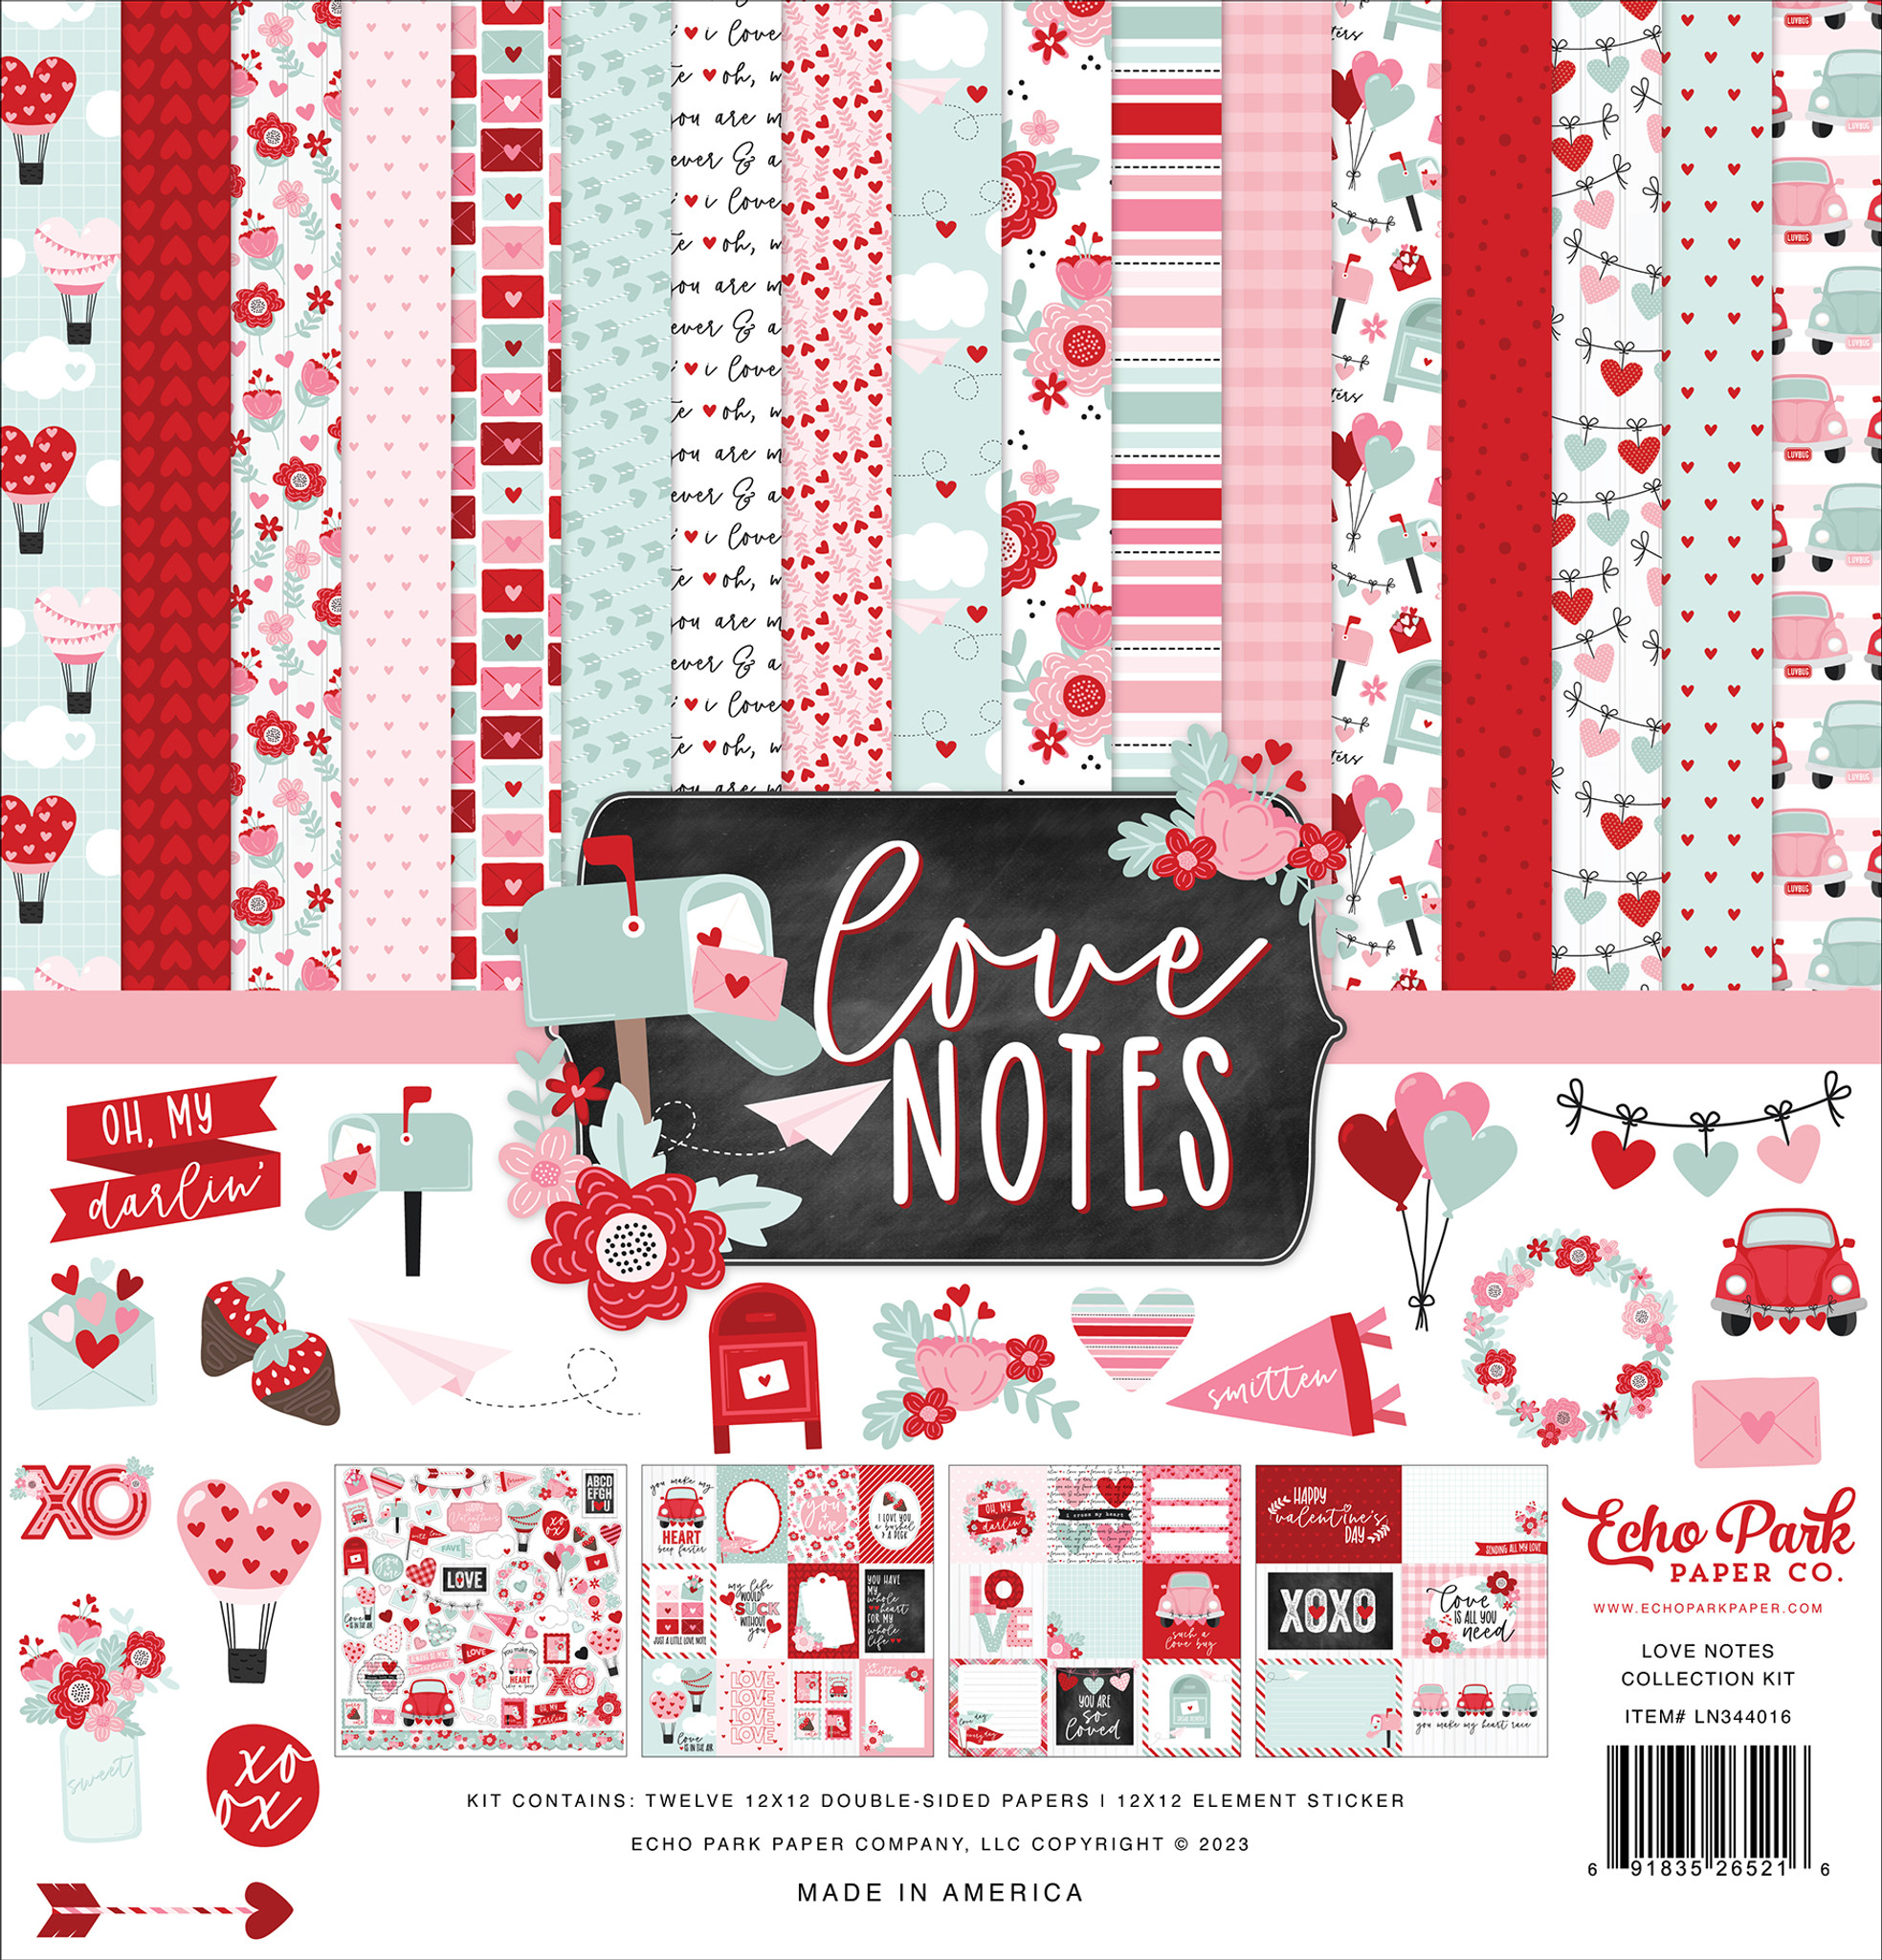 Love Notes Collection Kit - Echo Park Paper Co.